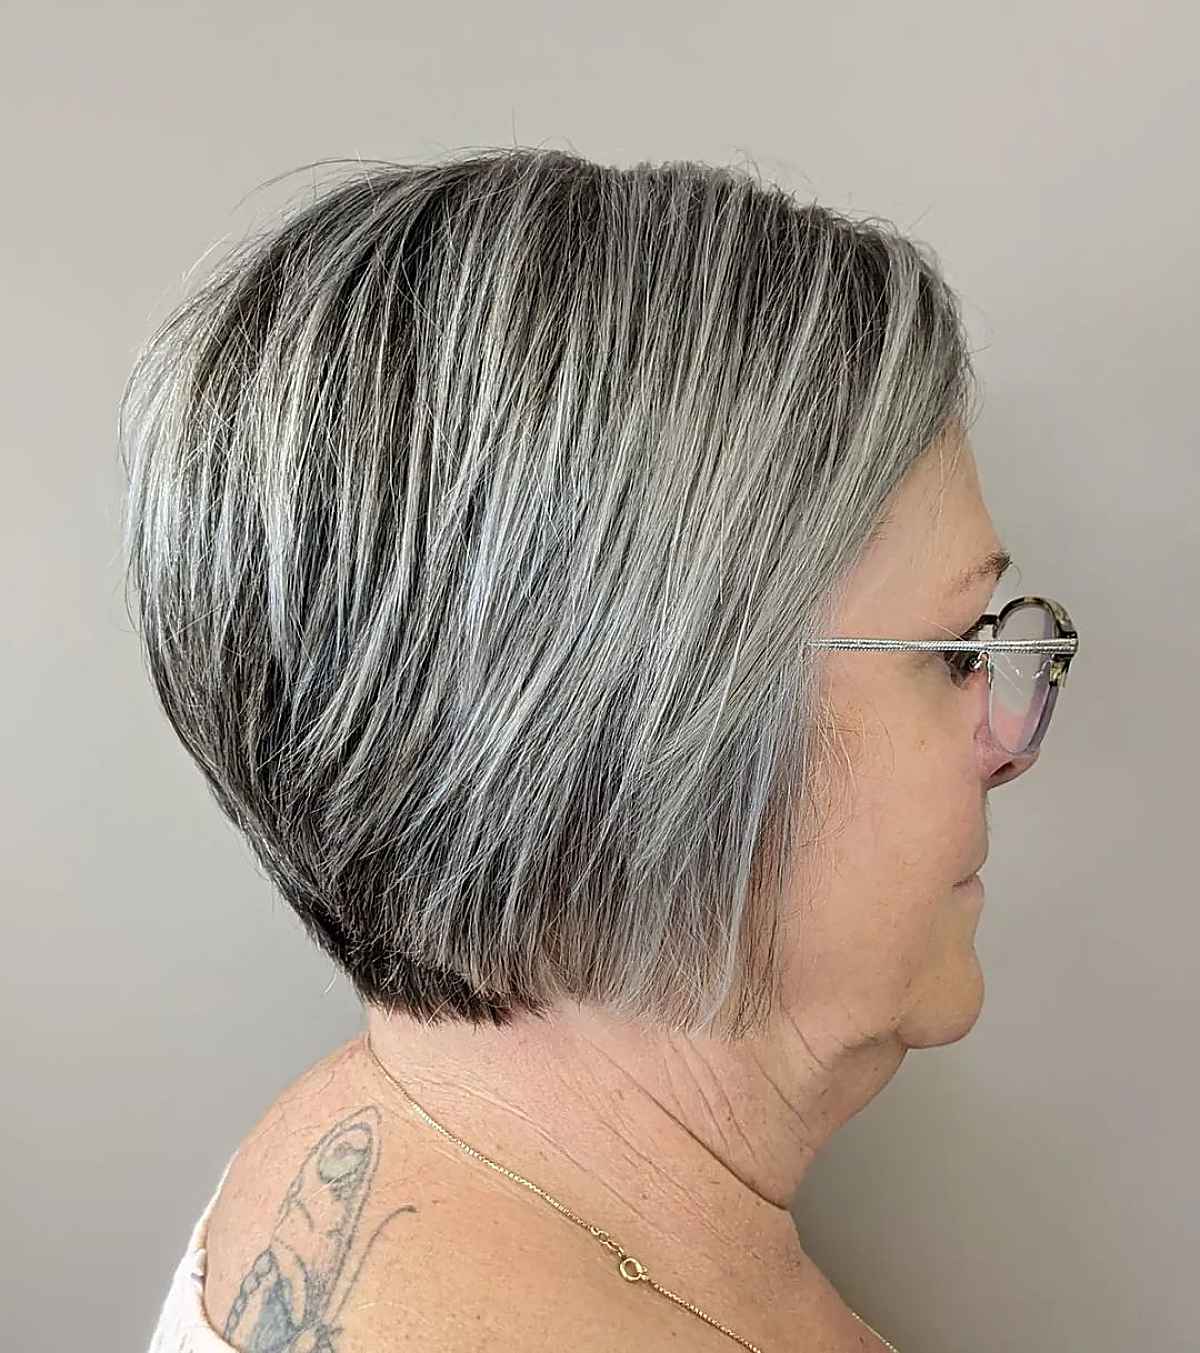 Flattering wedge hairstyle for women over 60 with glasses